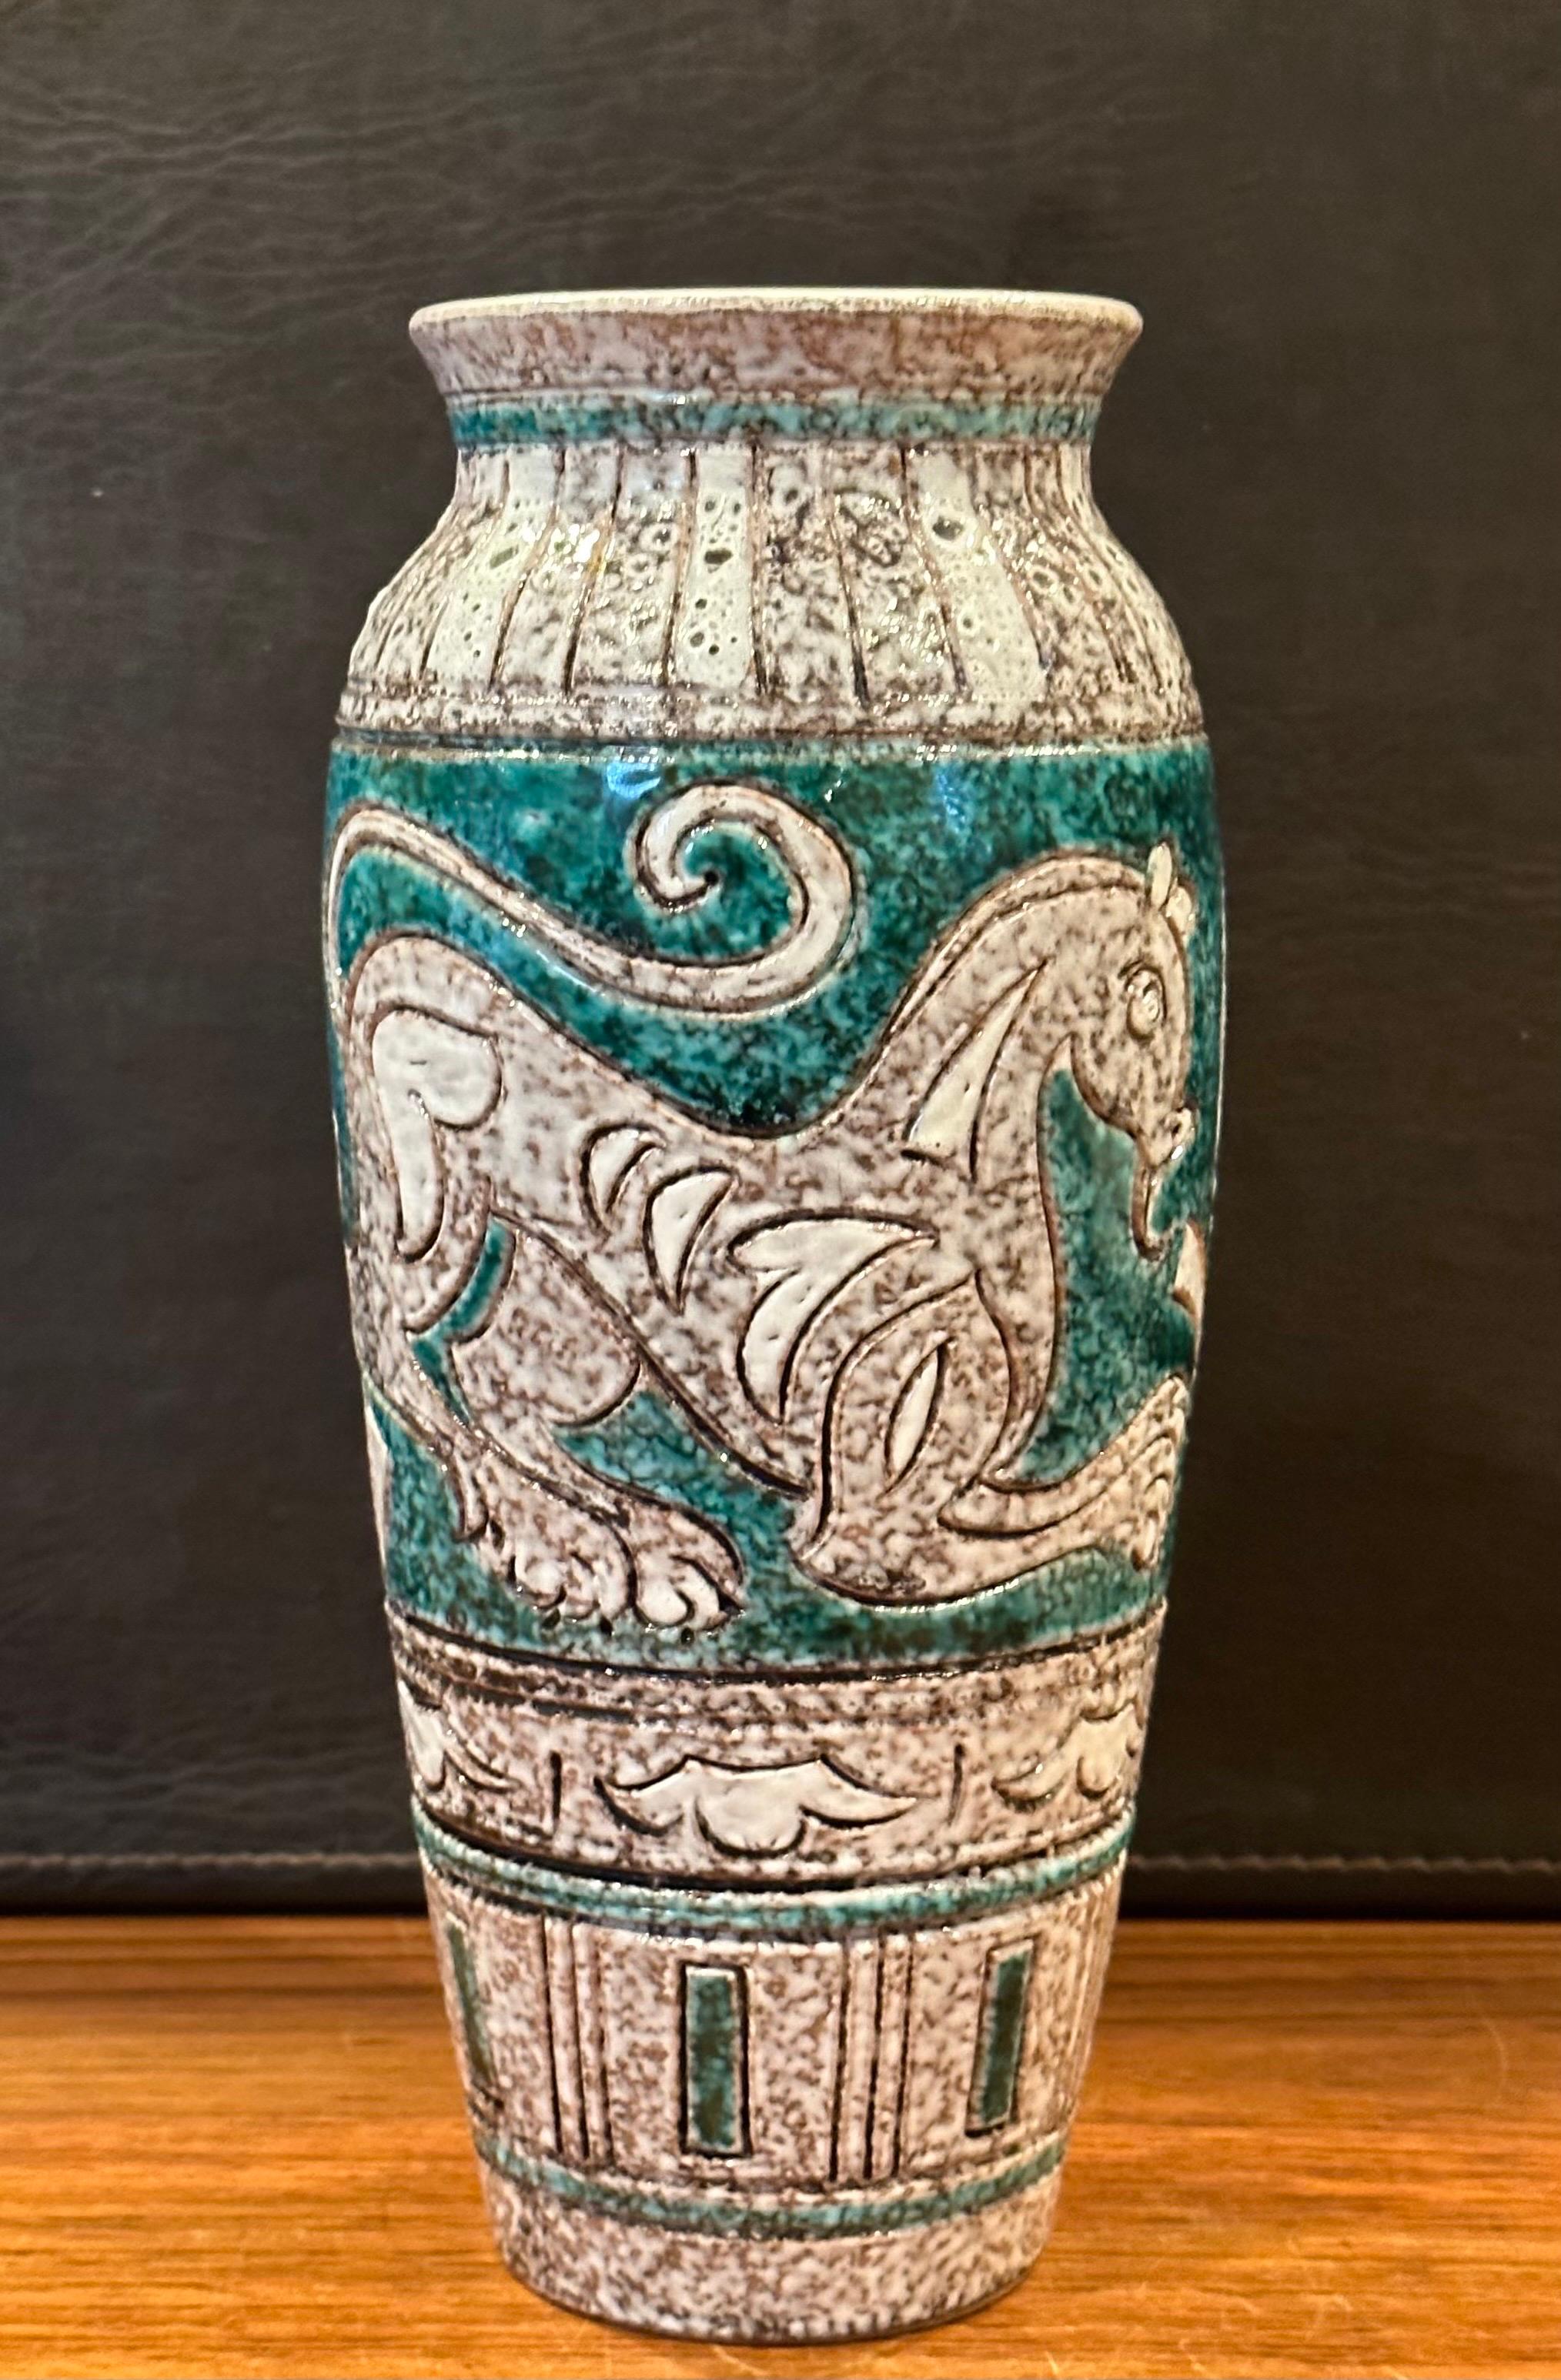 Beautiful MCM stoneware vase by Fratelli Fanciullacci, circa 1960s. The hand thrown vase is in great vintage condition with no chips or cracks and measures 5